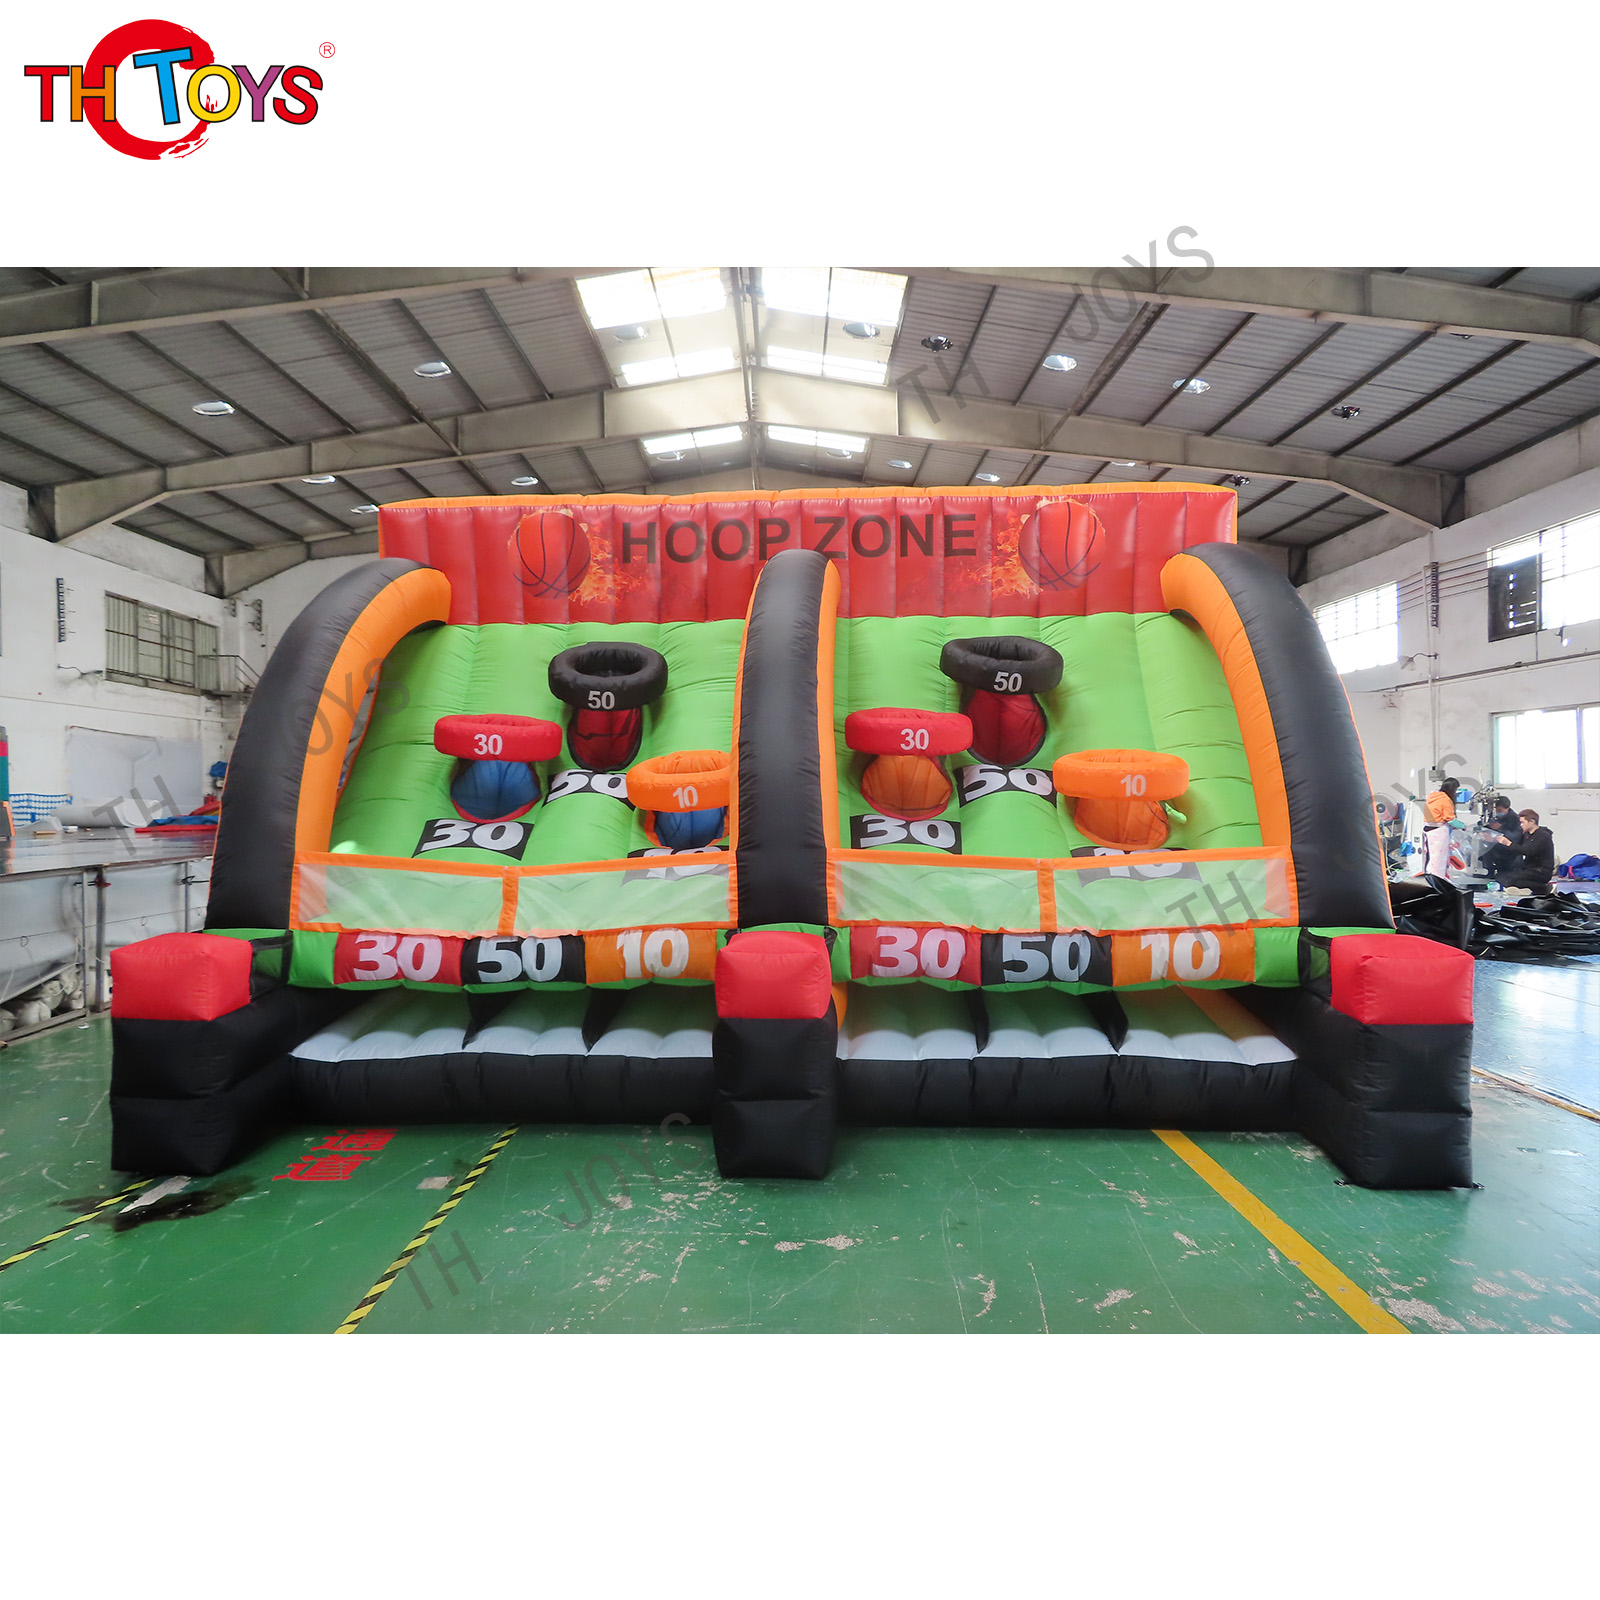 Garden Giant Park Hover Hungry Bungee Running Sport Indoor Ips Challenge Carnival Mini Inflatable Basketball Hoops Games